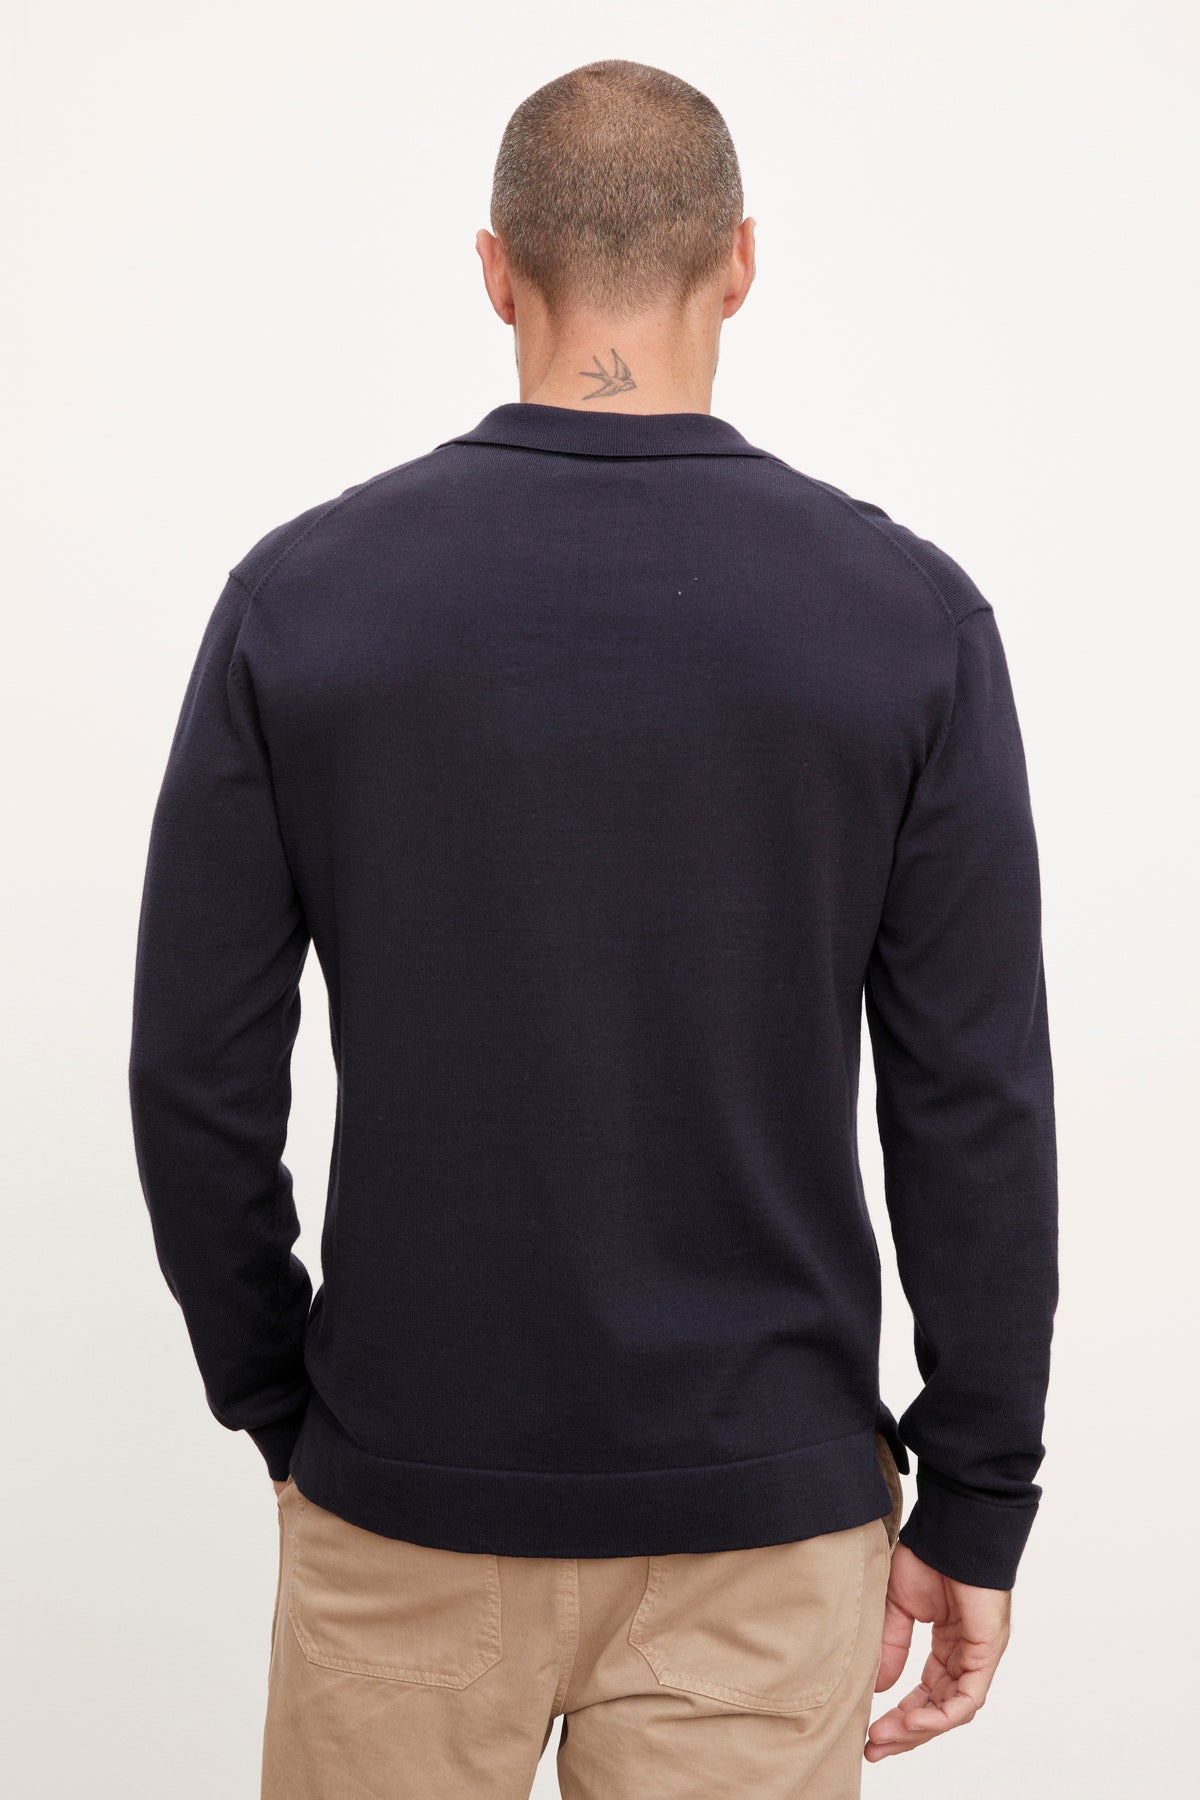   The back view of a man wearing a Velvet by Graham & Spencer navy sweater and khaki pants. 